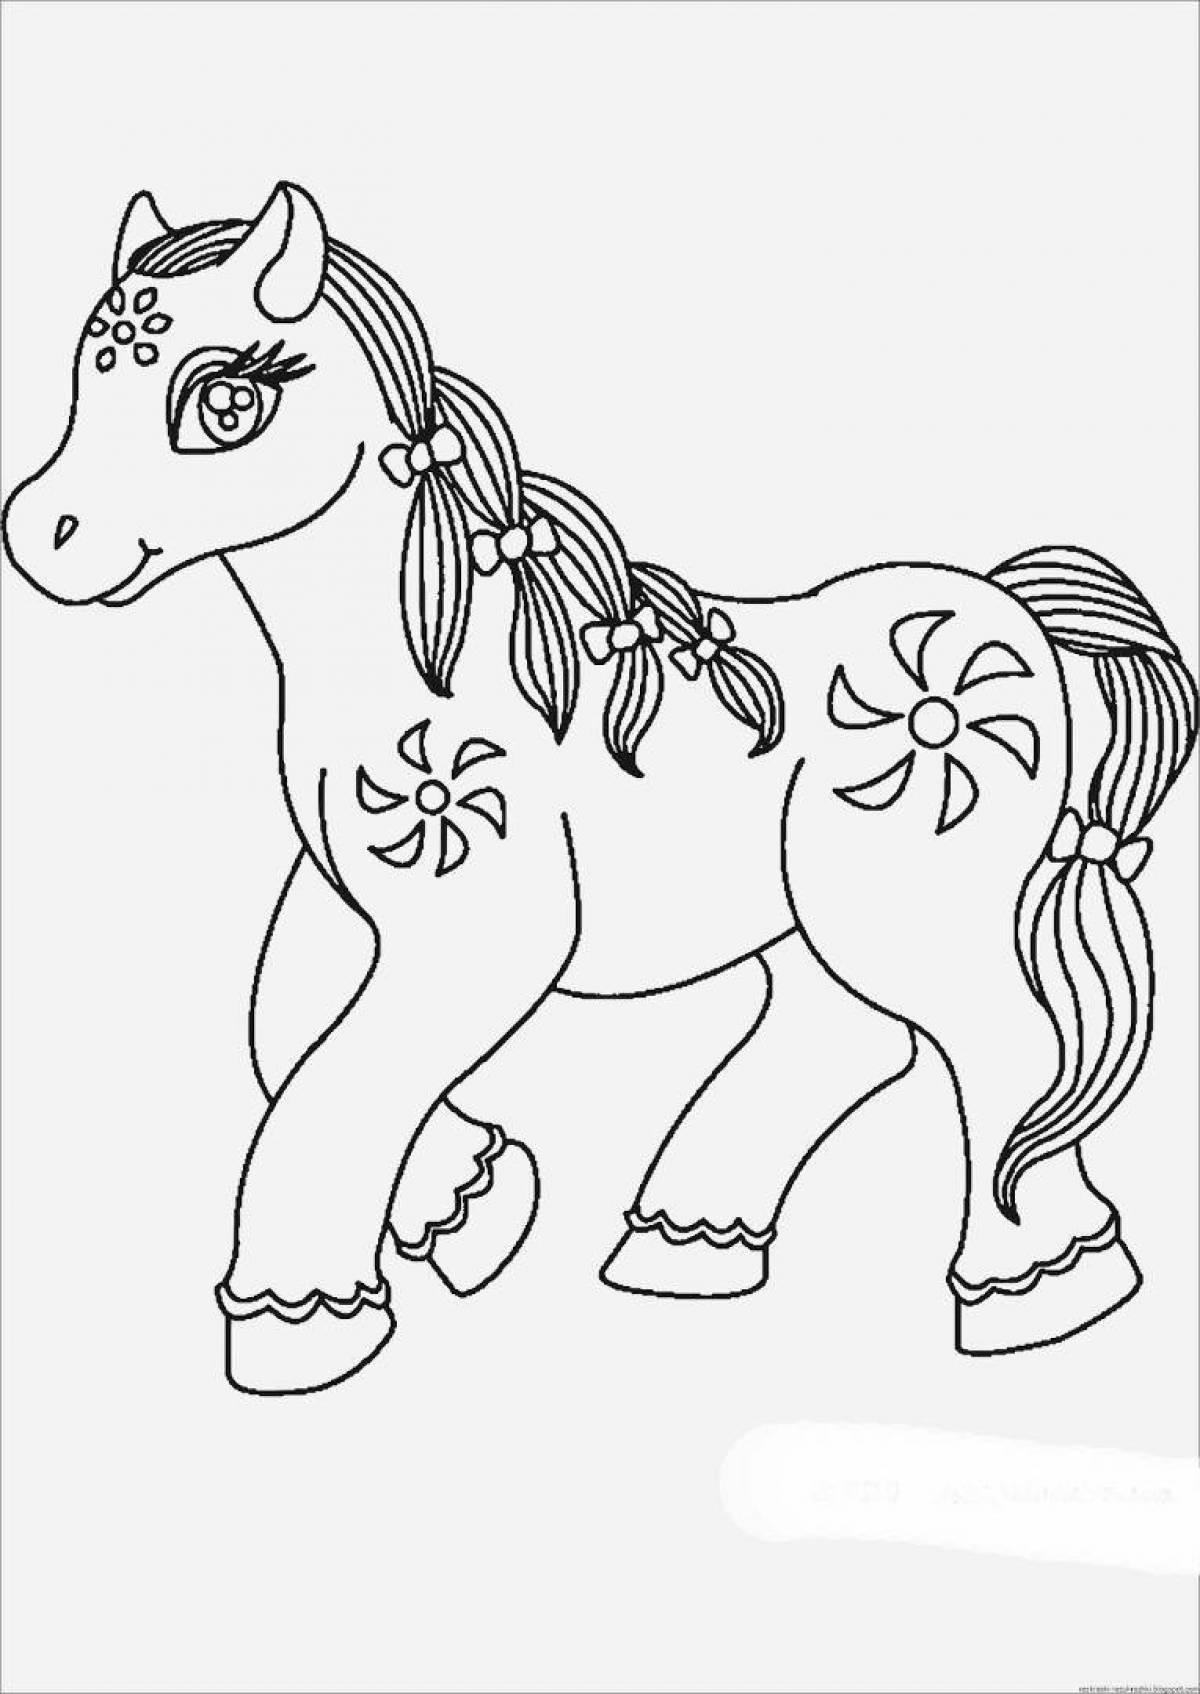 Great horse coloring book for 2-3 year olds